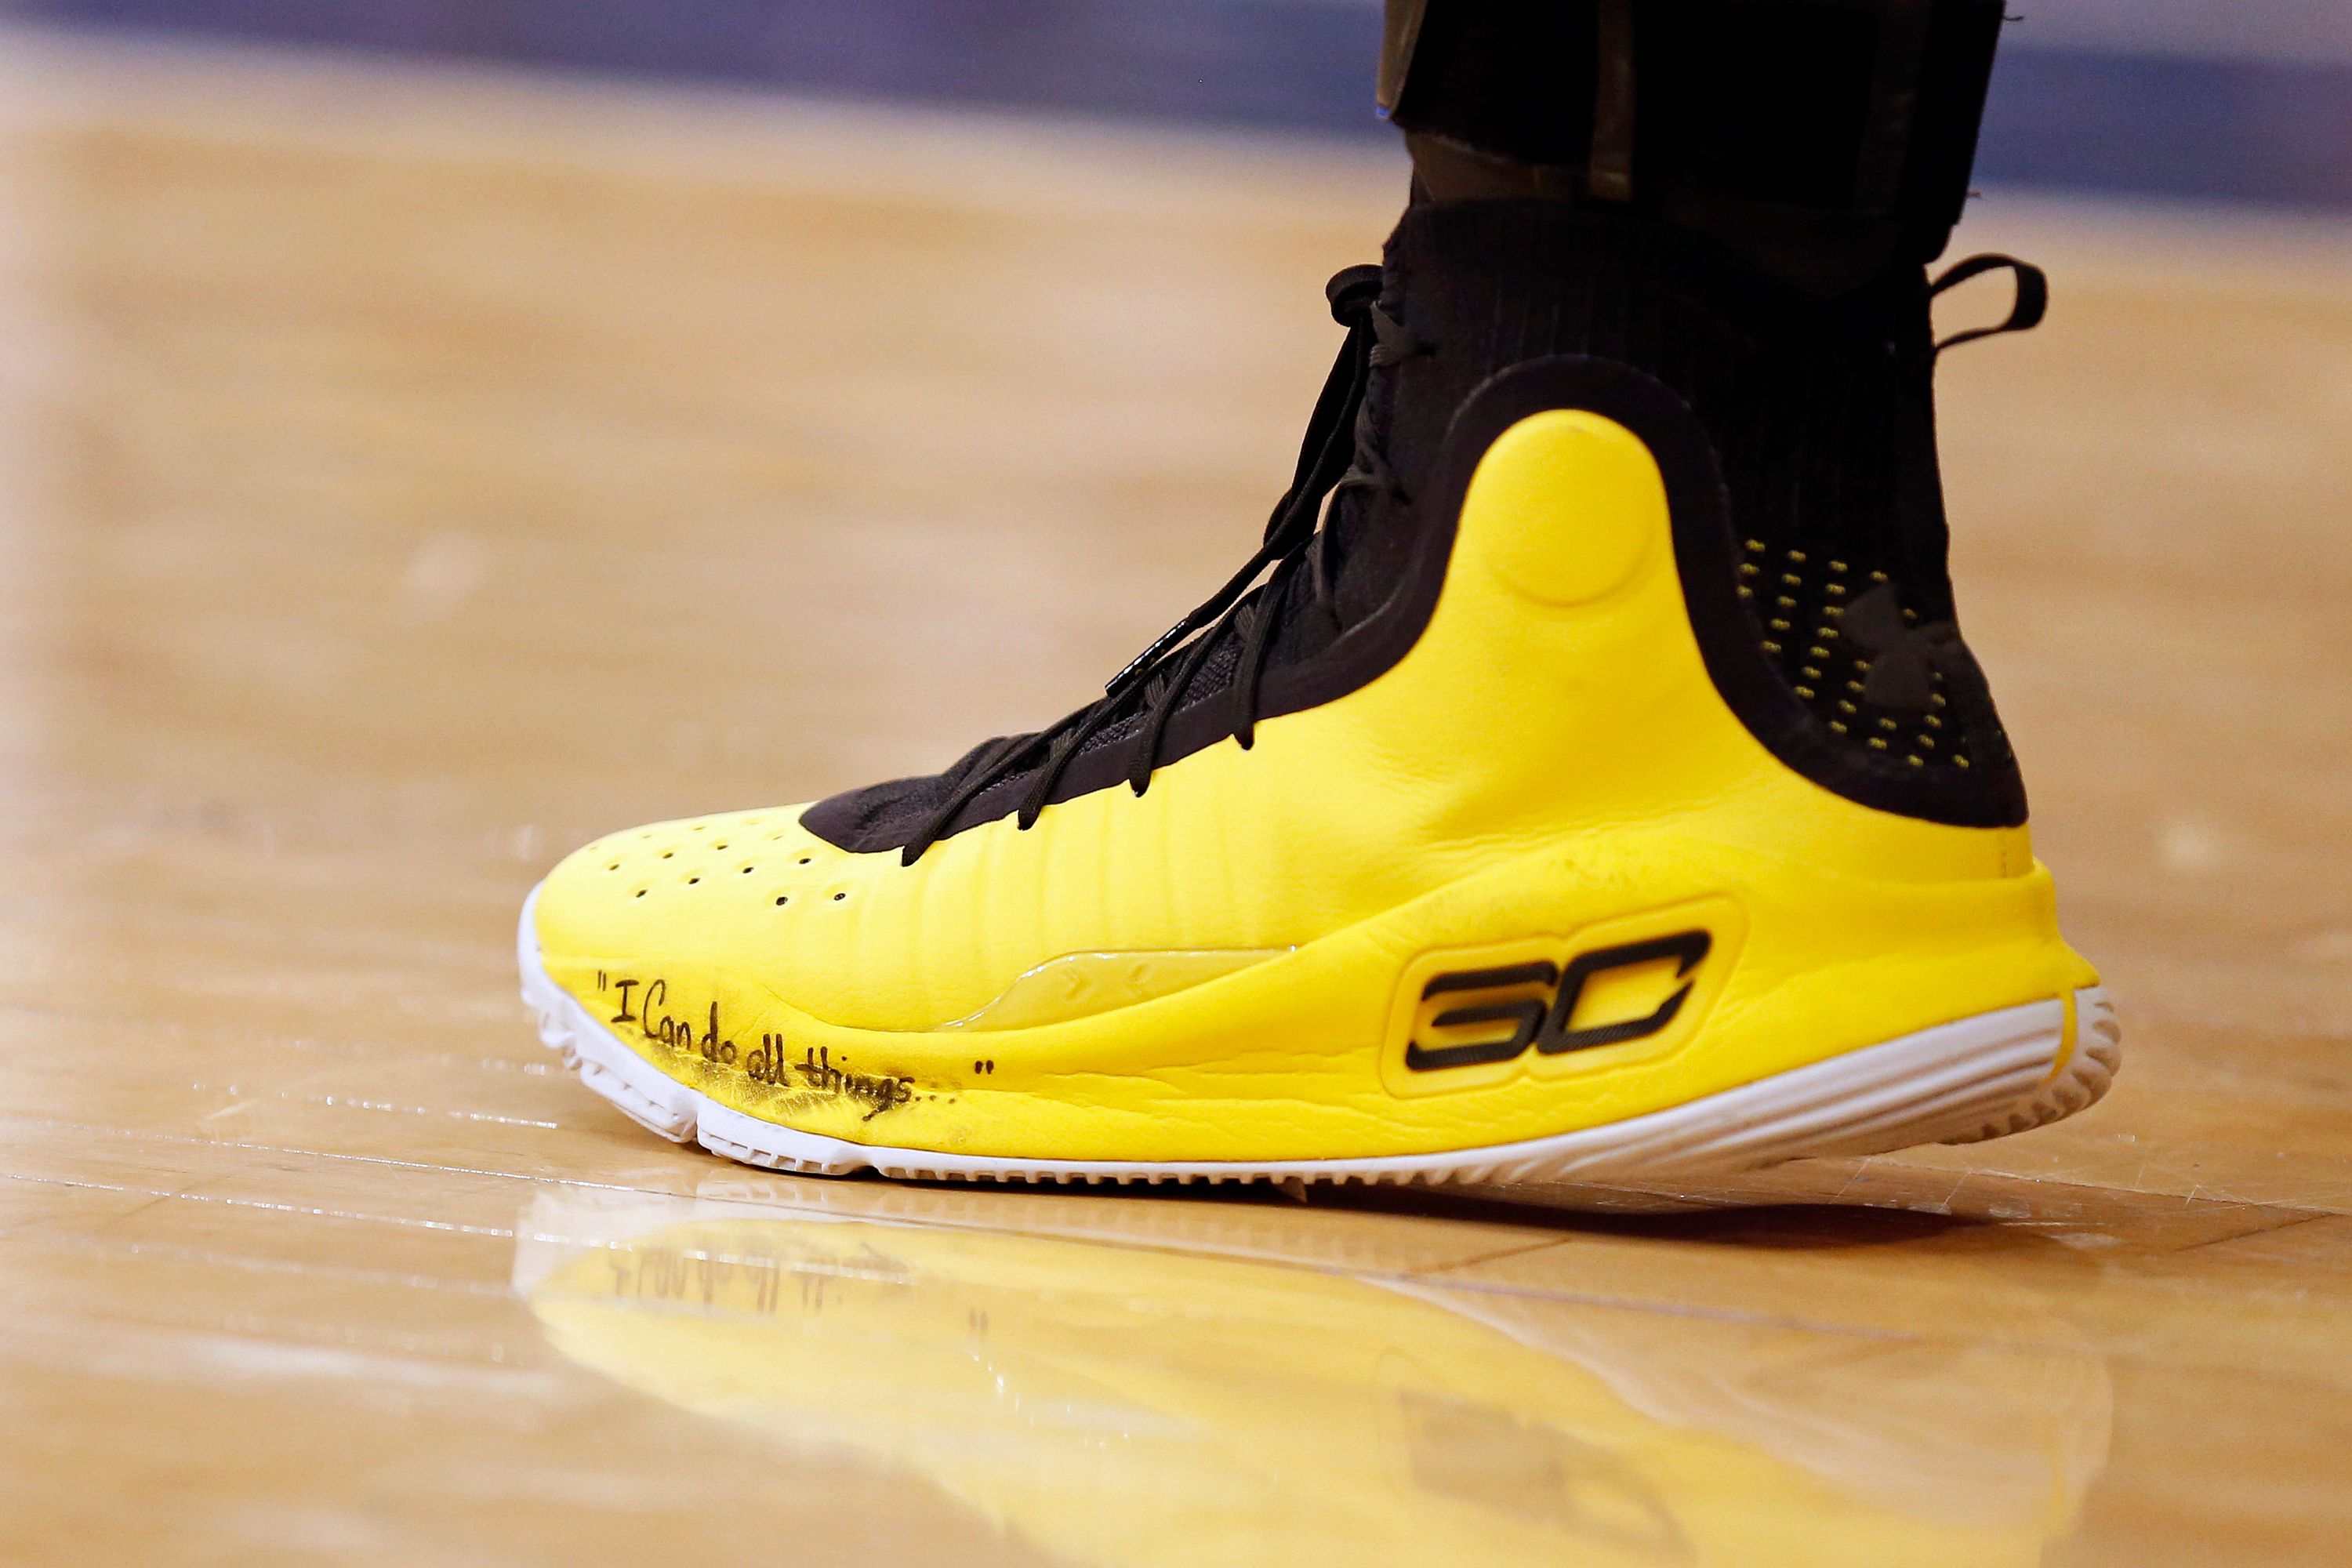 “I can do all things” written on Curry’s shoe